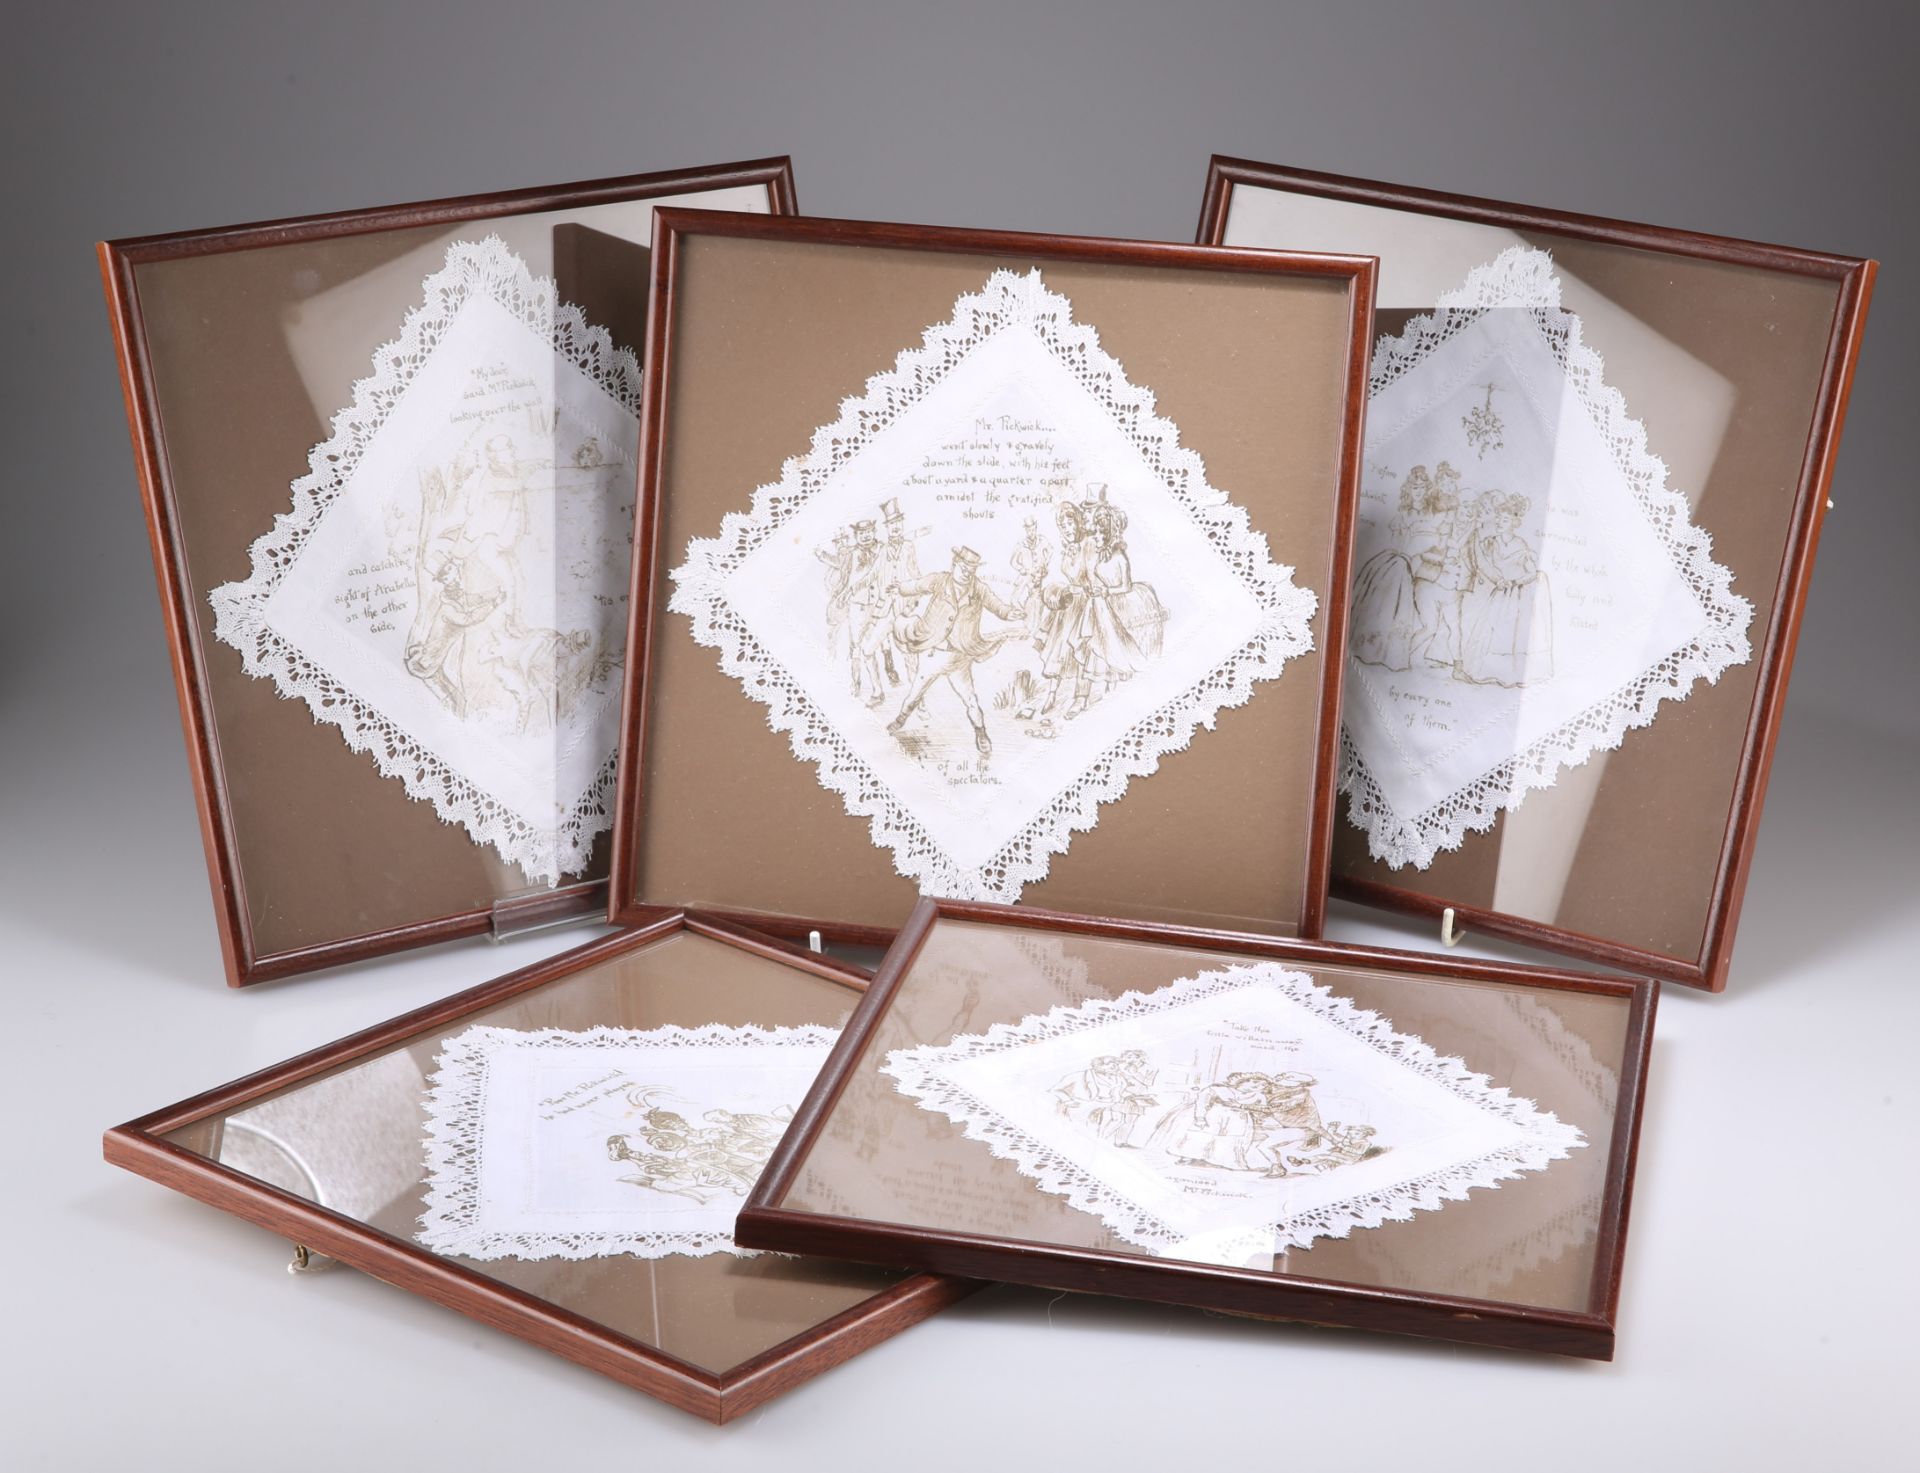 A GROUP OF FIVE CHARLES DICKENS PICKWICK PAPERS PRINTED LACE EDGED HANDKERCHIEFS